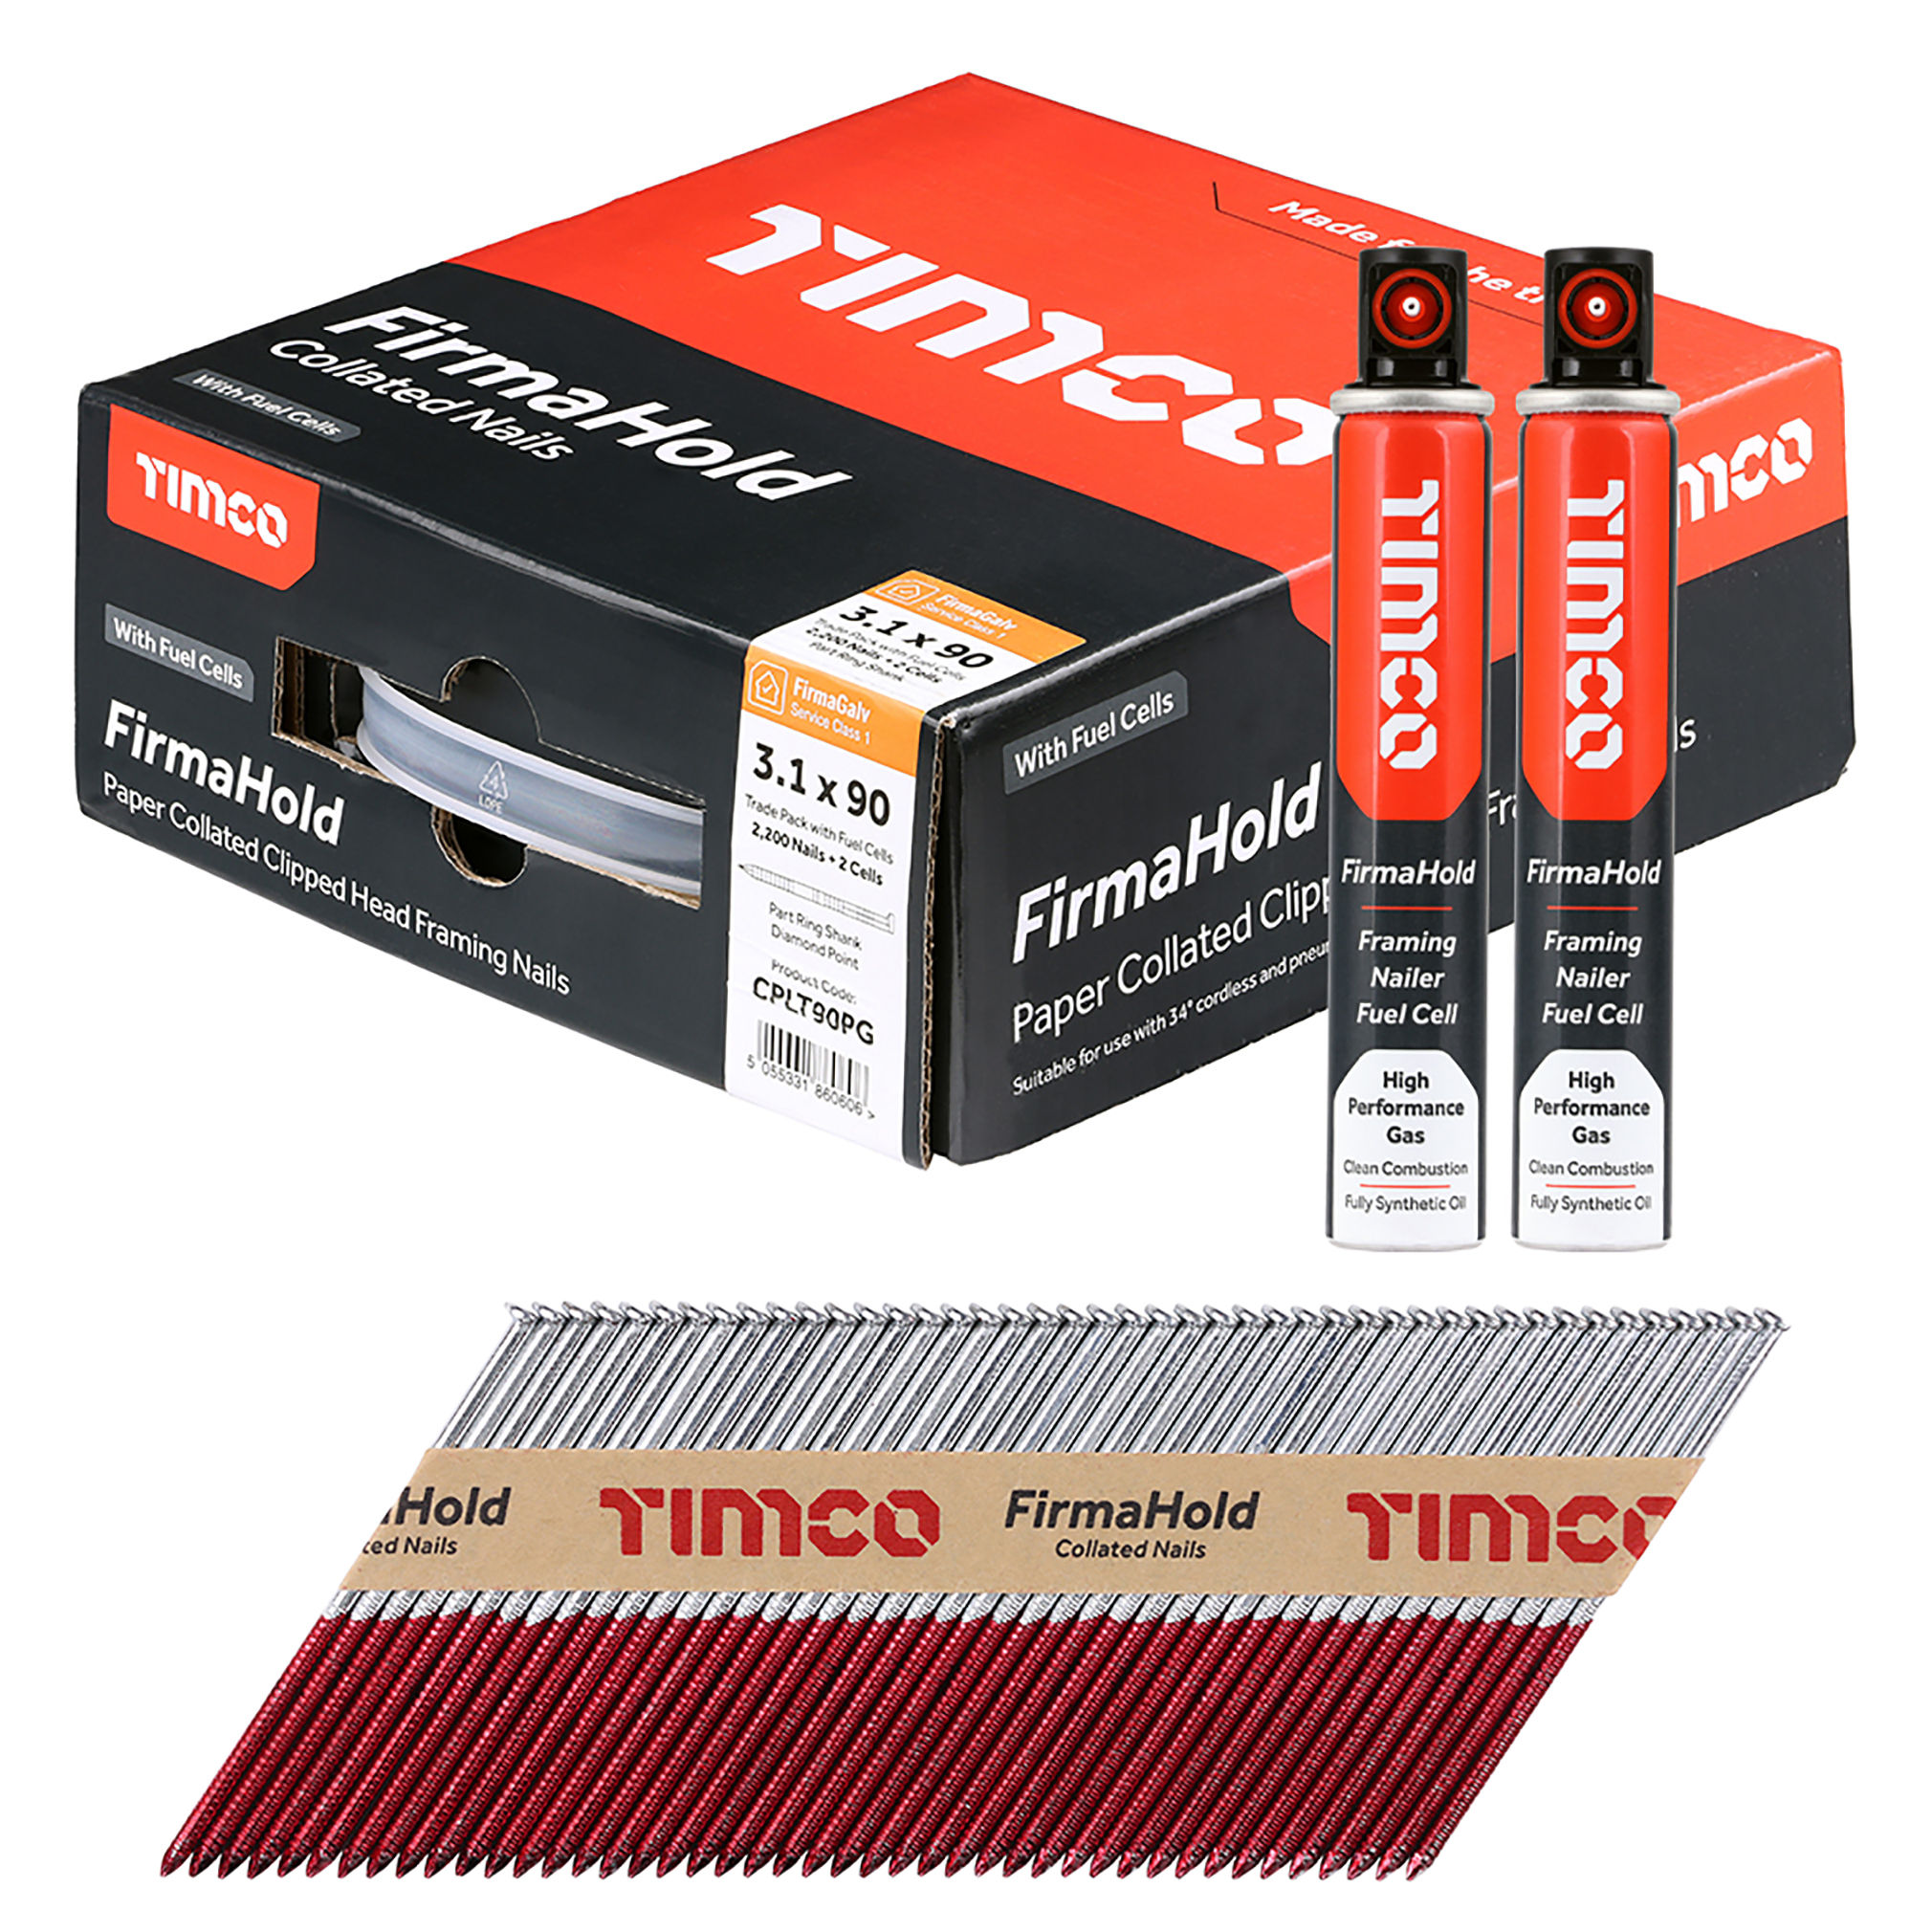 Timco FirmaHold Collated Clipped Head Part Ring Shank Nails and 2 Fuel Cells (Box of 2200) 3.1mm x 90mm - CPLT90PG